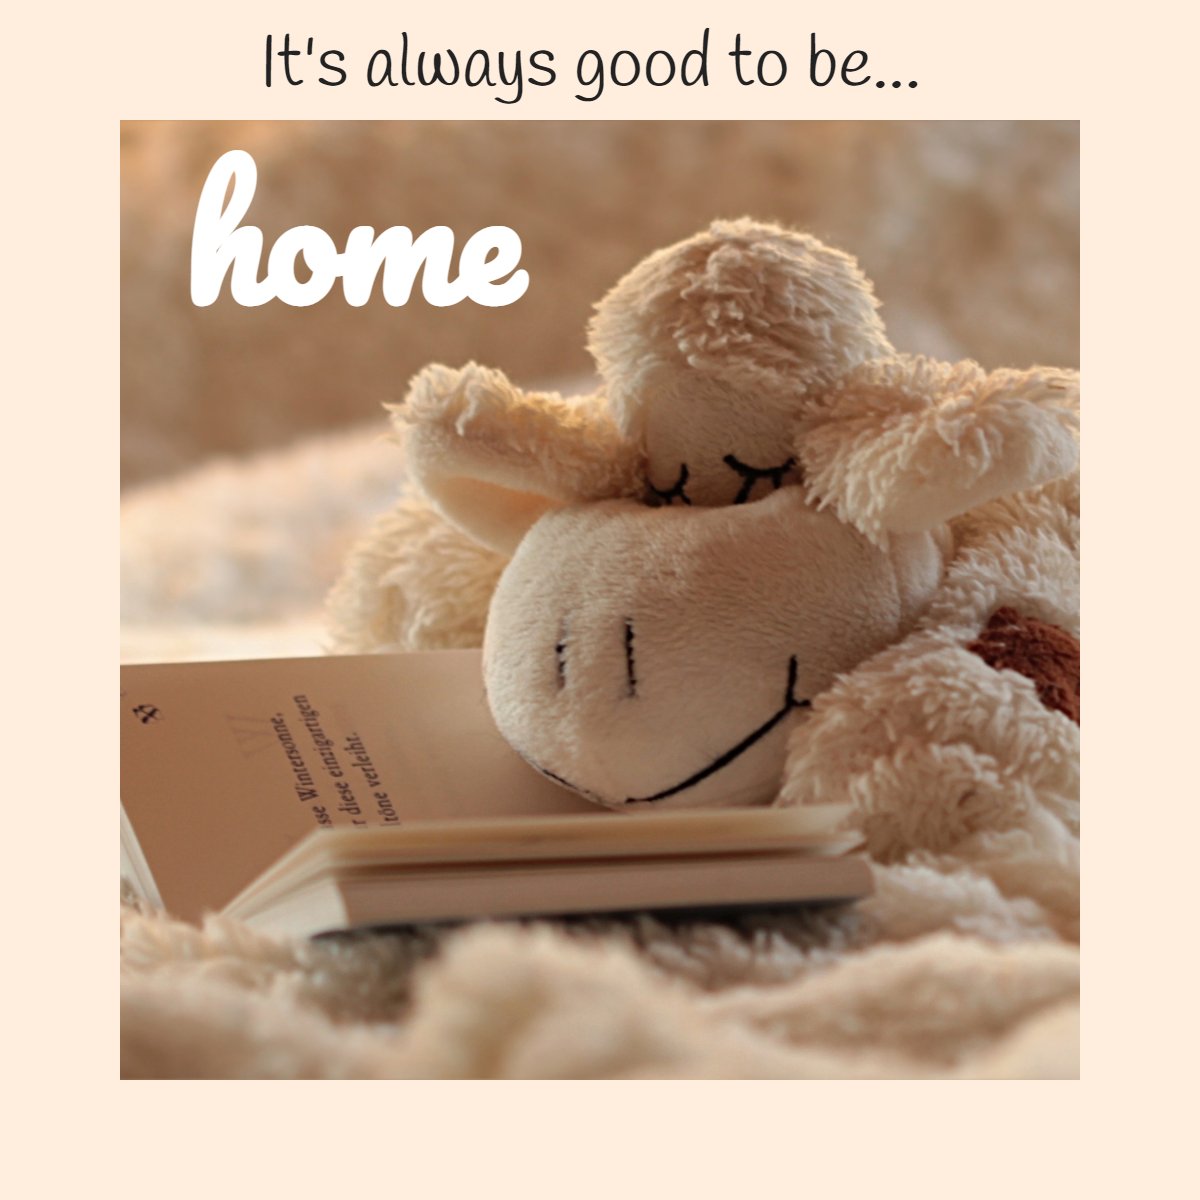 Where the heart is... 🏡 ❤️

#goodtobehome #happy #goodfeeling #goodfeelings #goodquote #goodthoughts 
 #Annapolis #Fulton #FortMeade #realestate #realtor #homevaluation #pcs #homevalues #LoweryHomeTeam